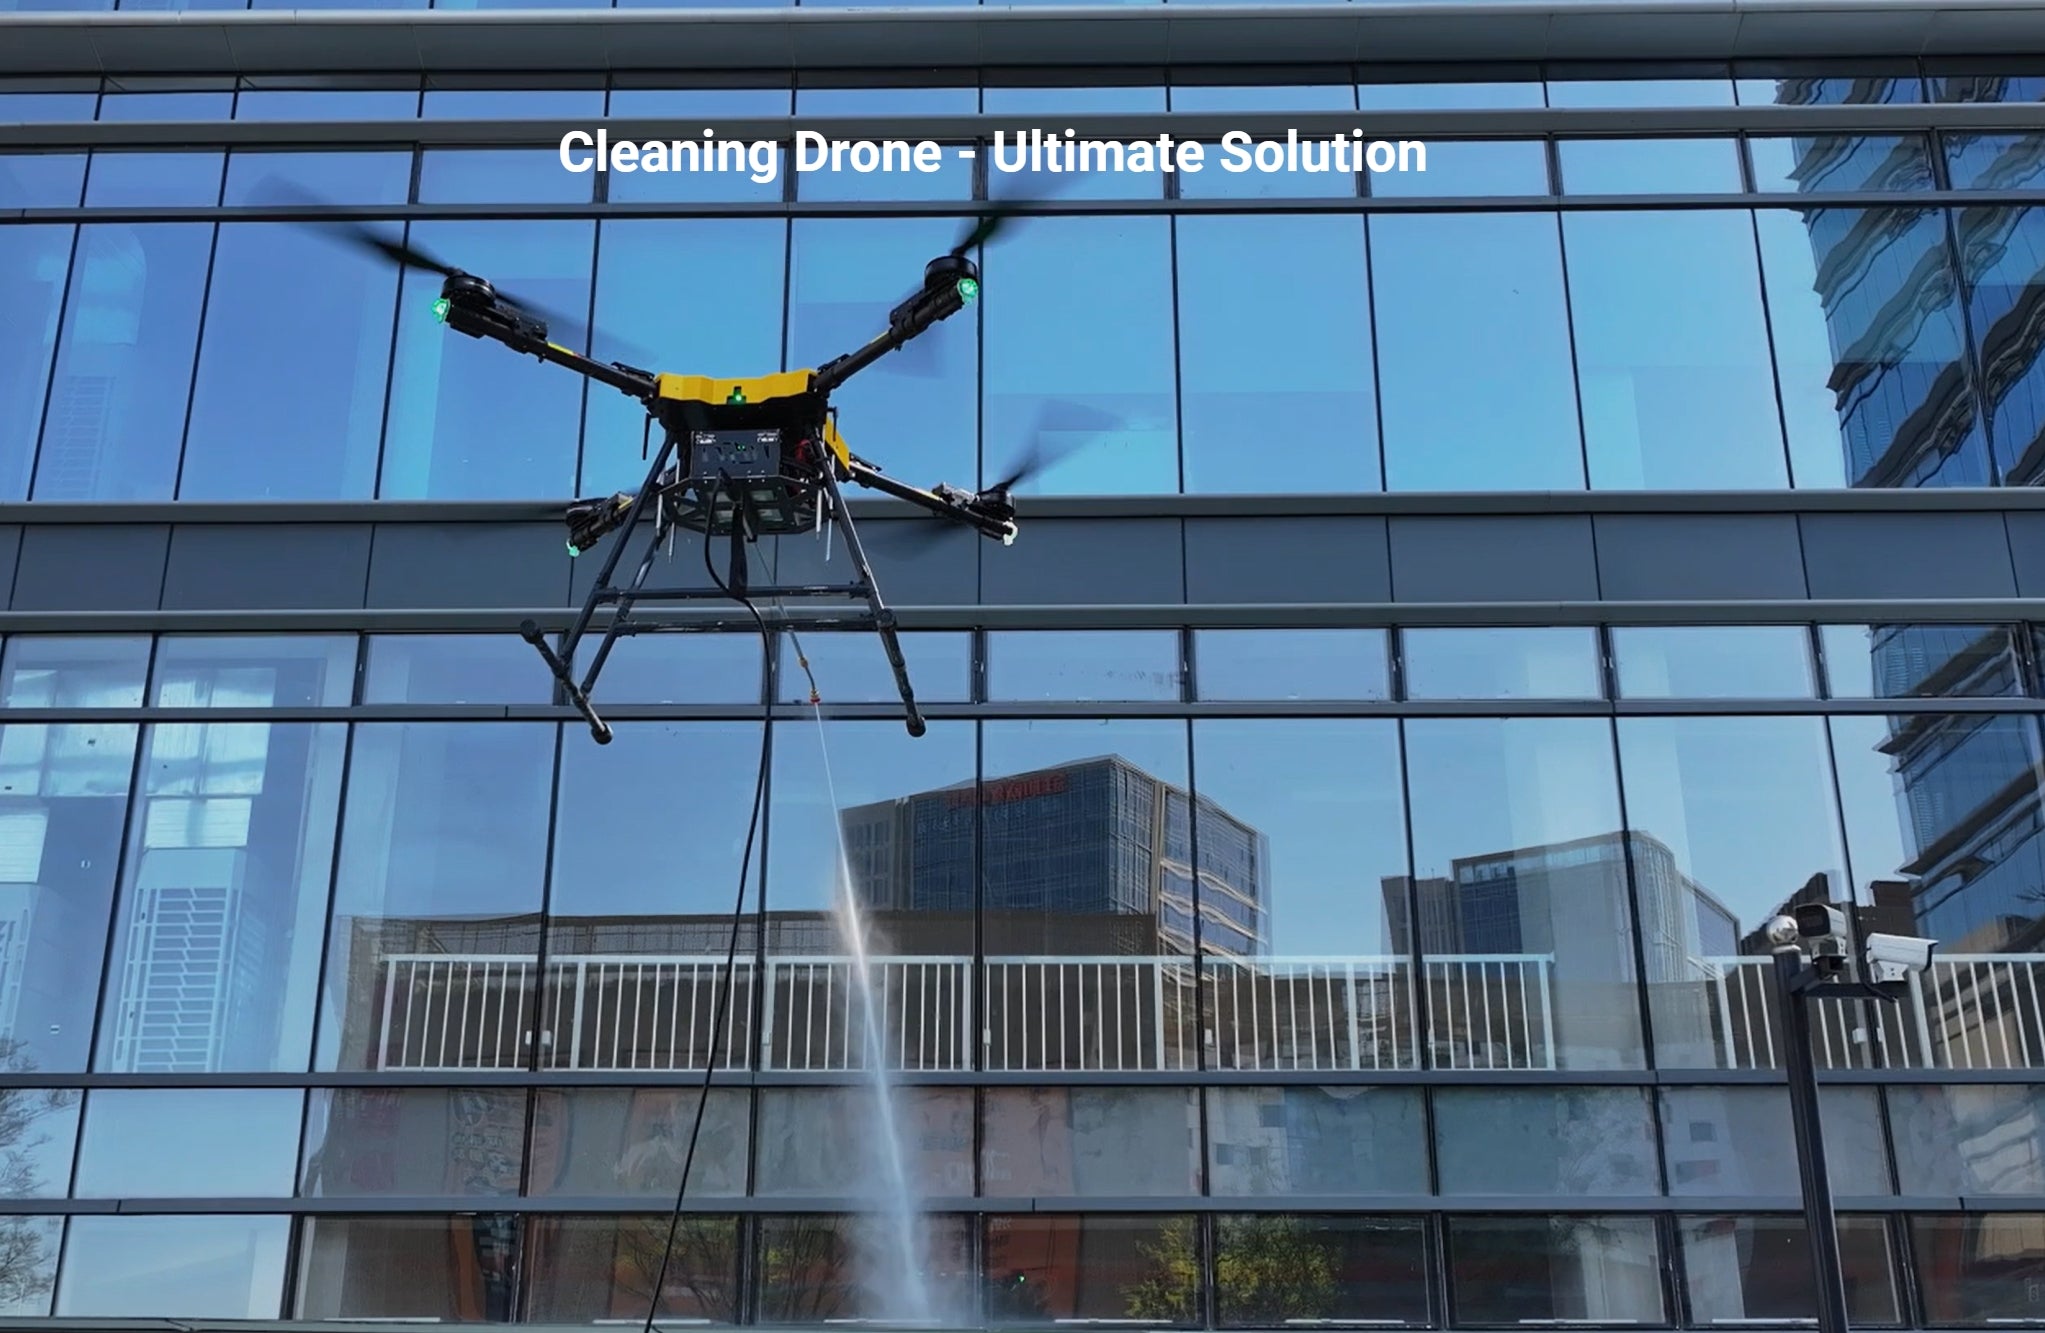 RCDrone, Cleaning Drone Ultimate Solution 1